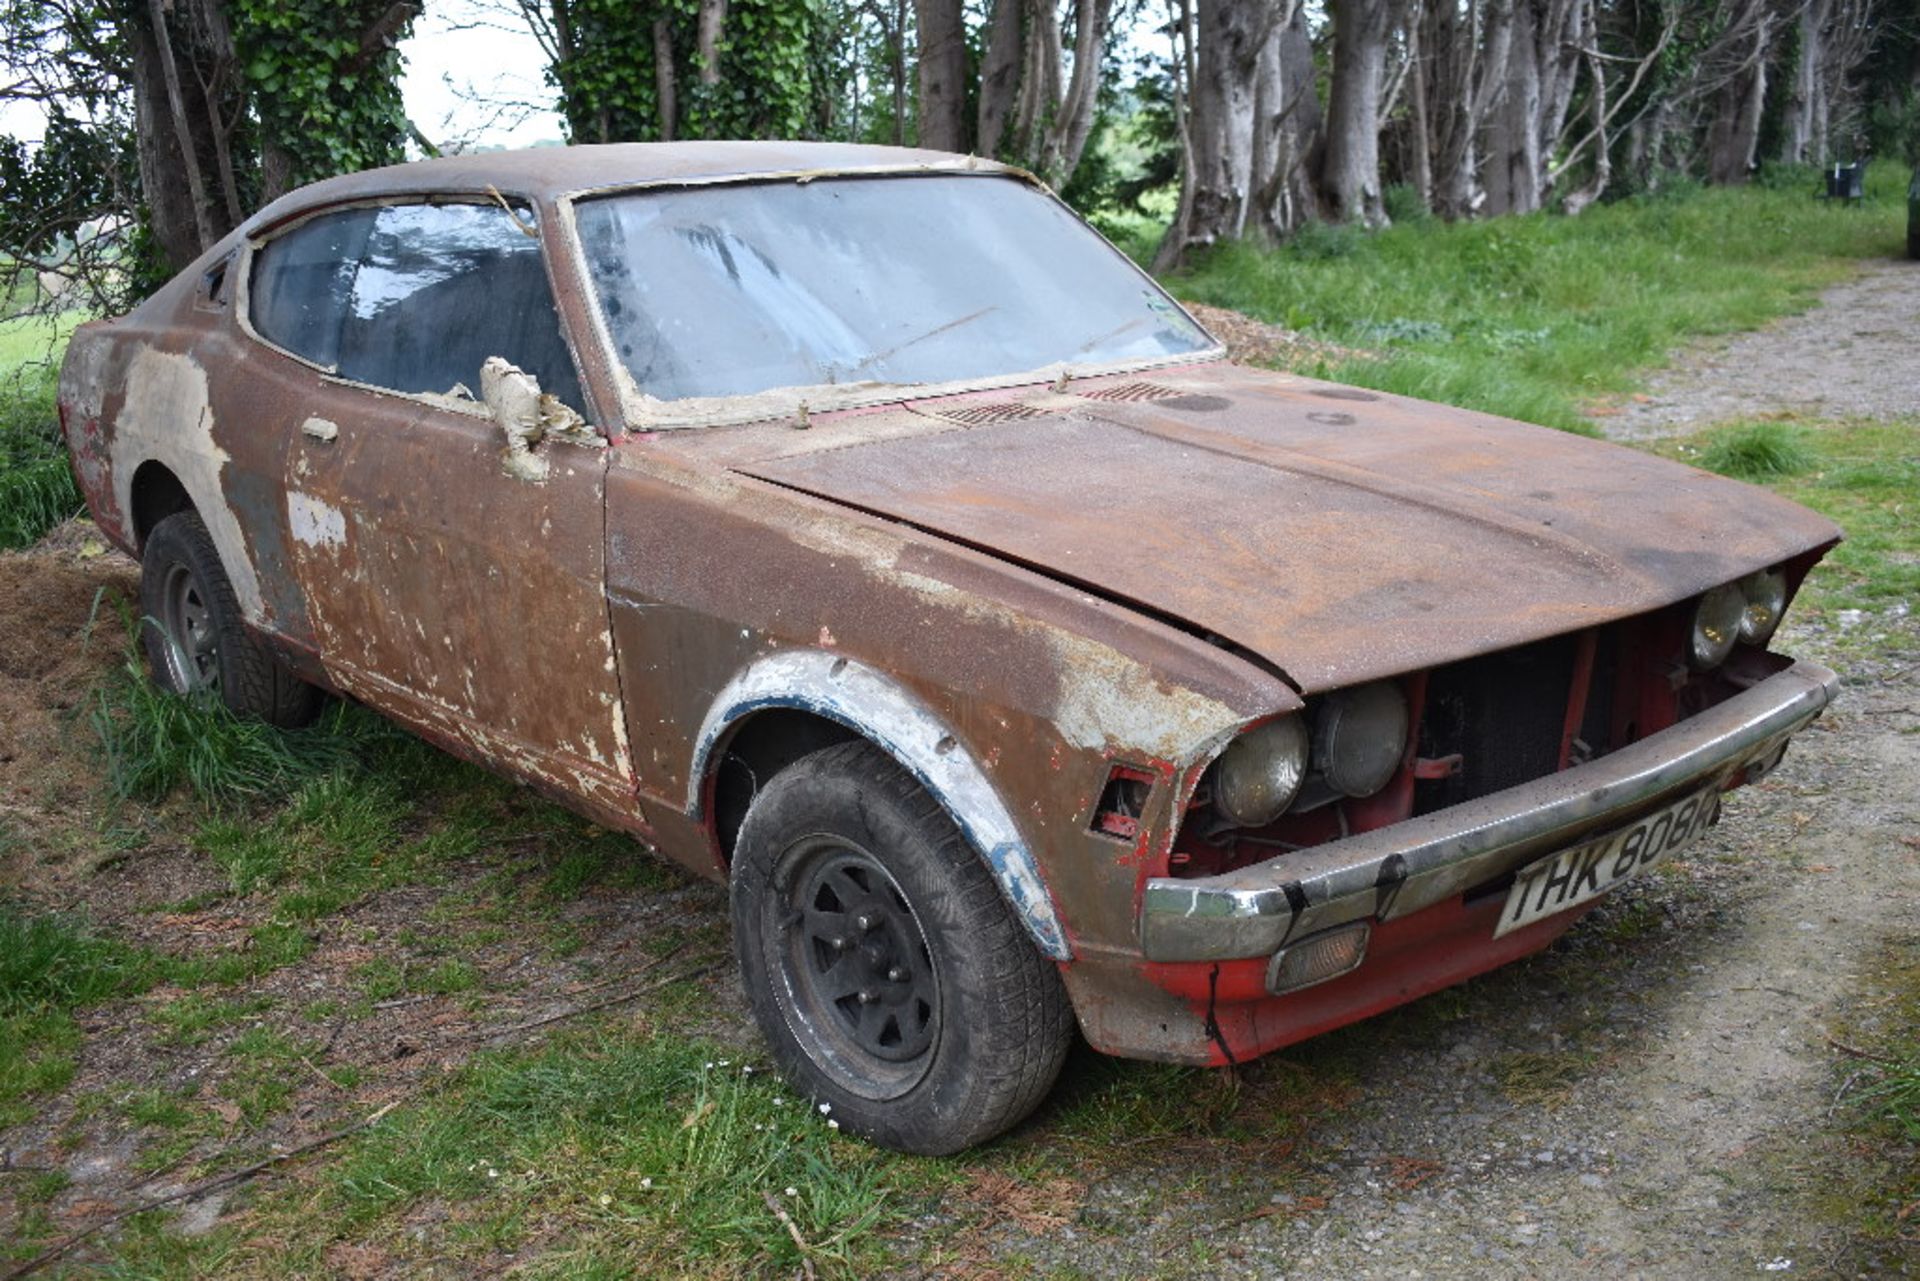 A 1977 Mitsubishi Colt Galant 2000 GTO GS-R restoration project, registration number THK 808R, - Image 4 of 6